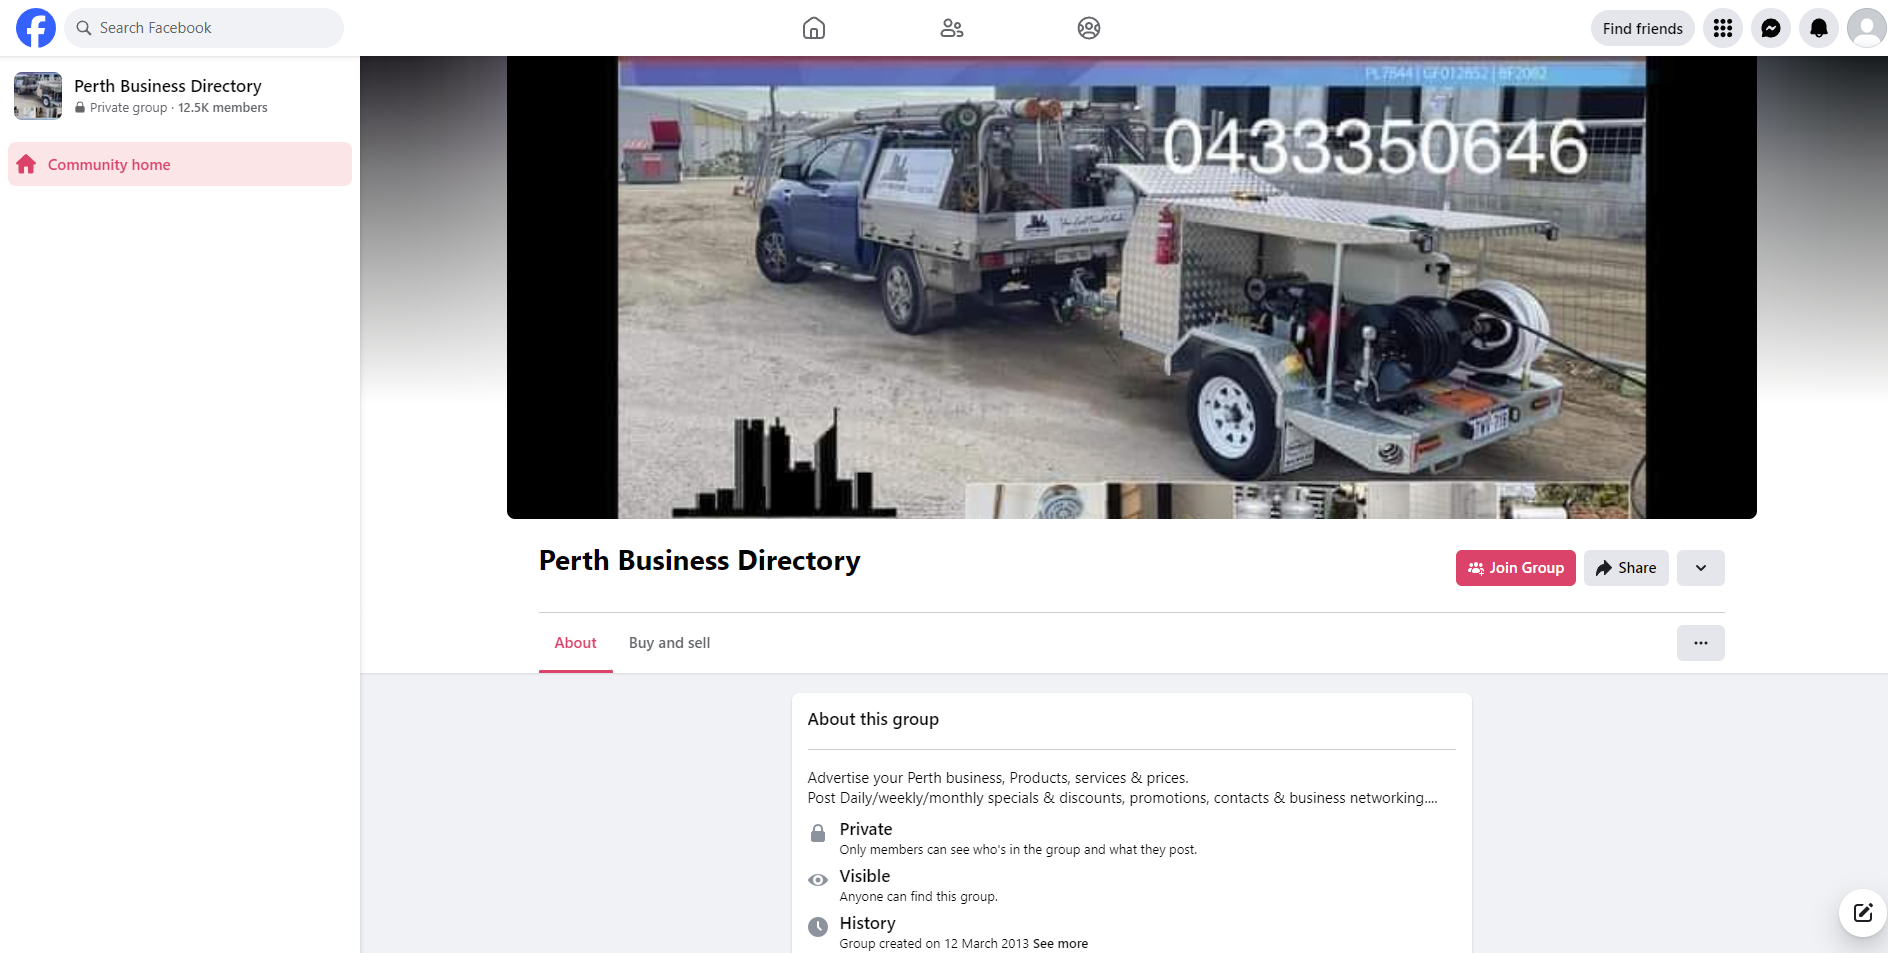 Perth Business Directory